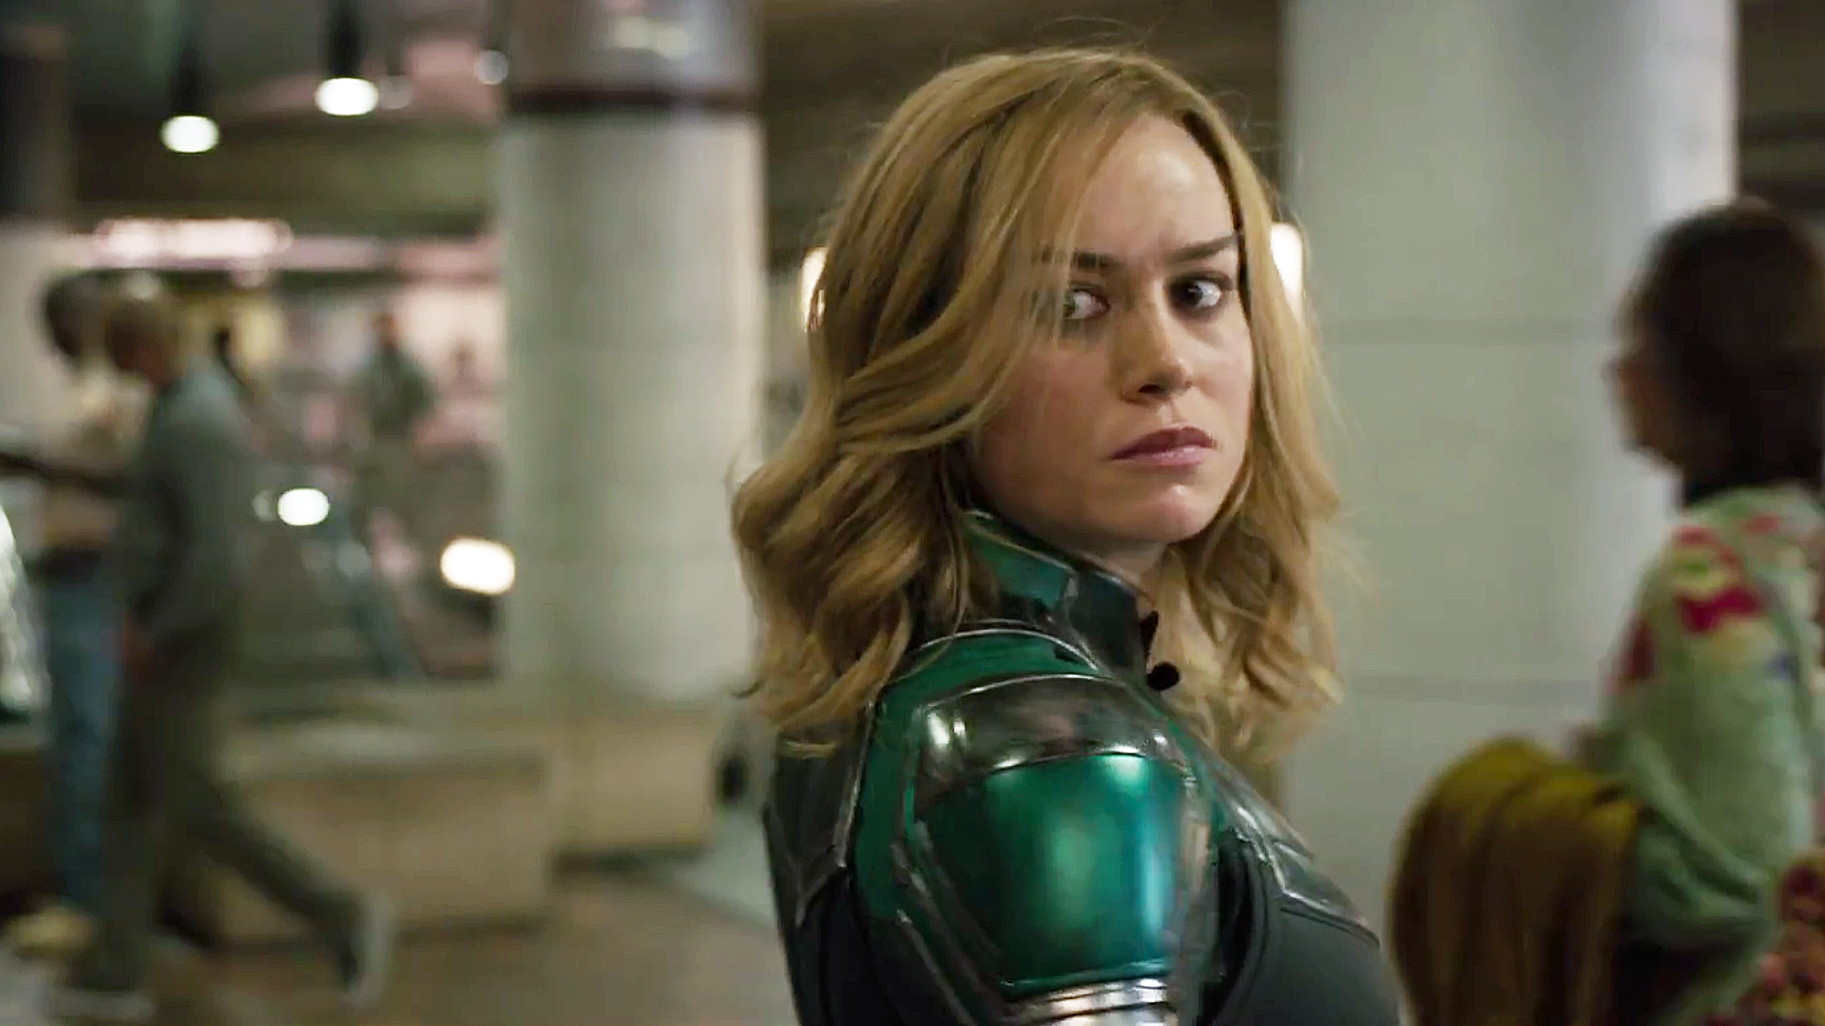 [WATCH] 'Captain Marvel' Trailer is Finally Here